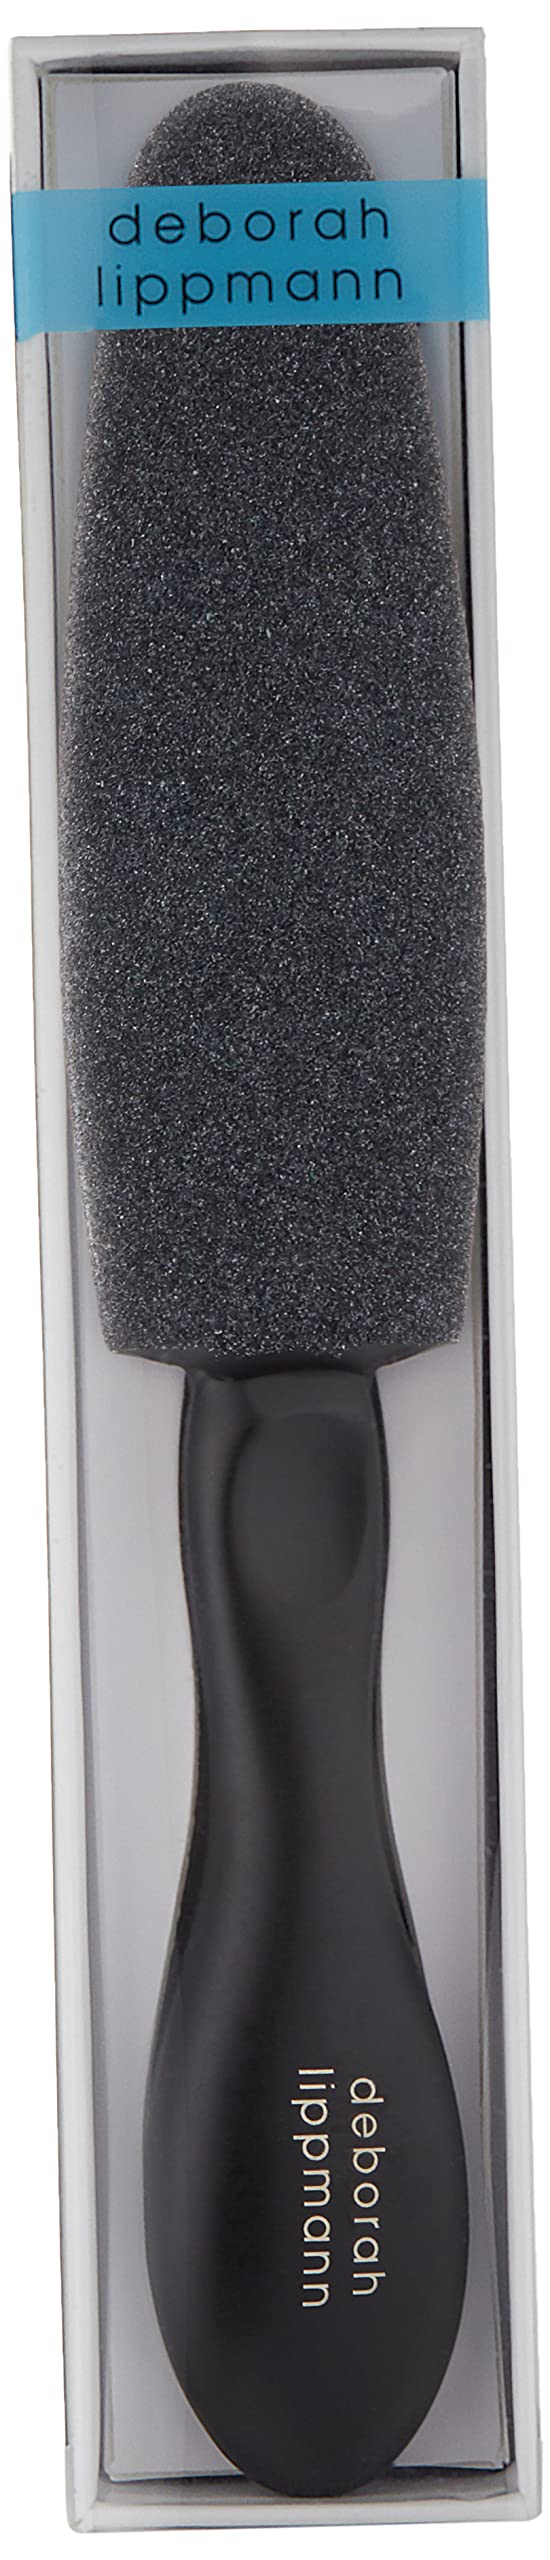 Deborah Lippmann Soul Survivor | High-Performance Foot File with Abrasion-Resistant PTFE Coating | Double Sided with Fine and Coarse Grit Sides